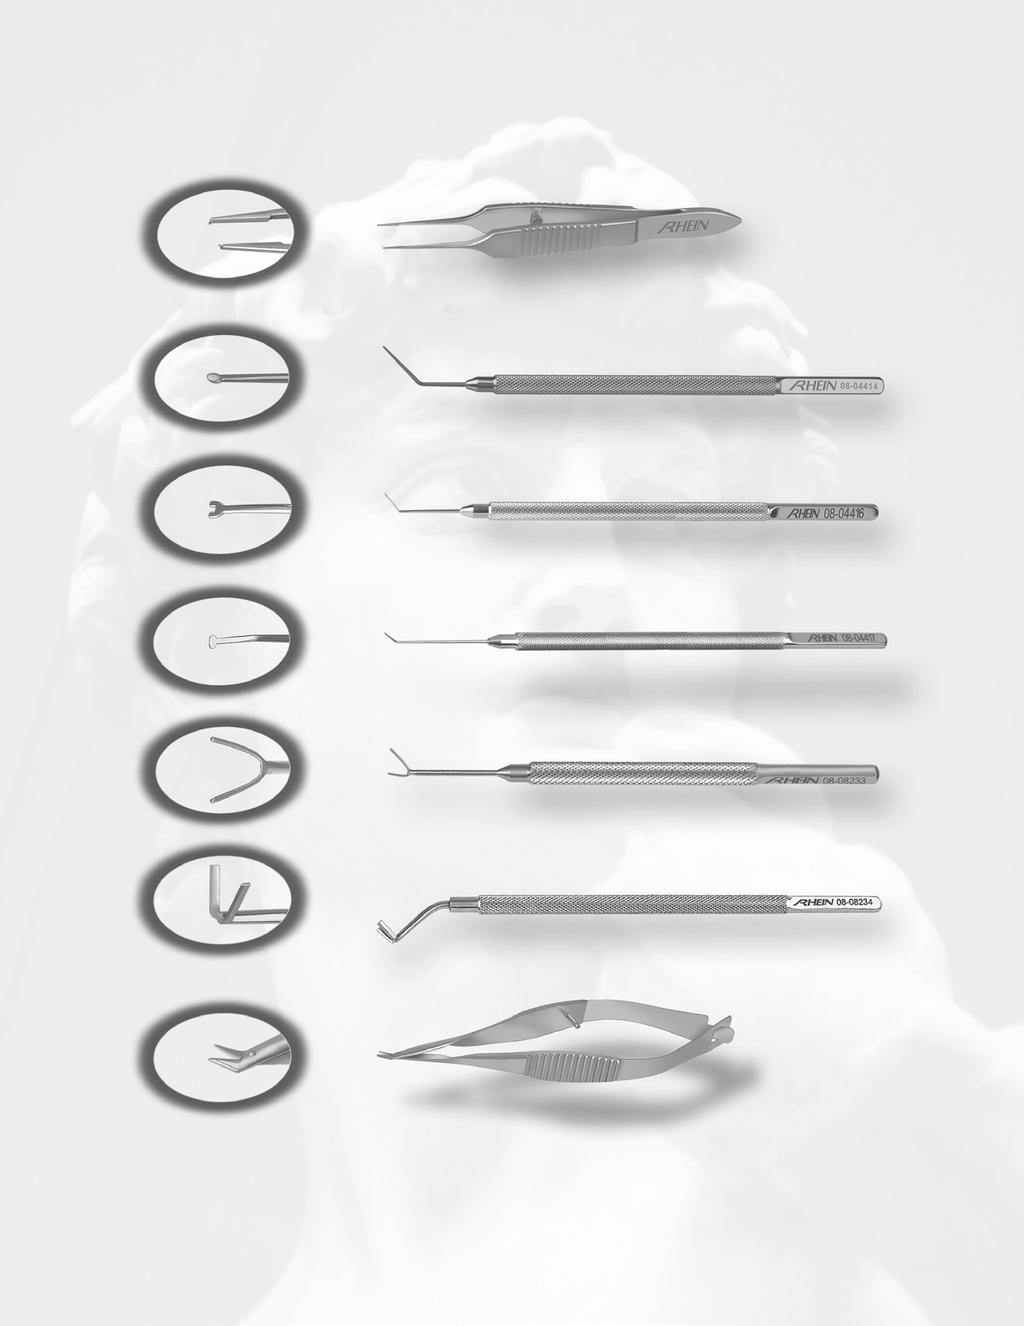 Canaloplasty 08-01306: 0.06mm Canaloplasty Forceps, Short Handle, Stainless 08-01306-L: 0.